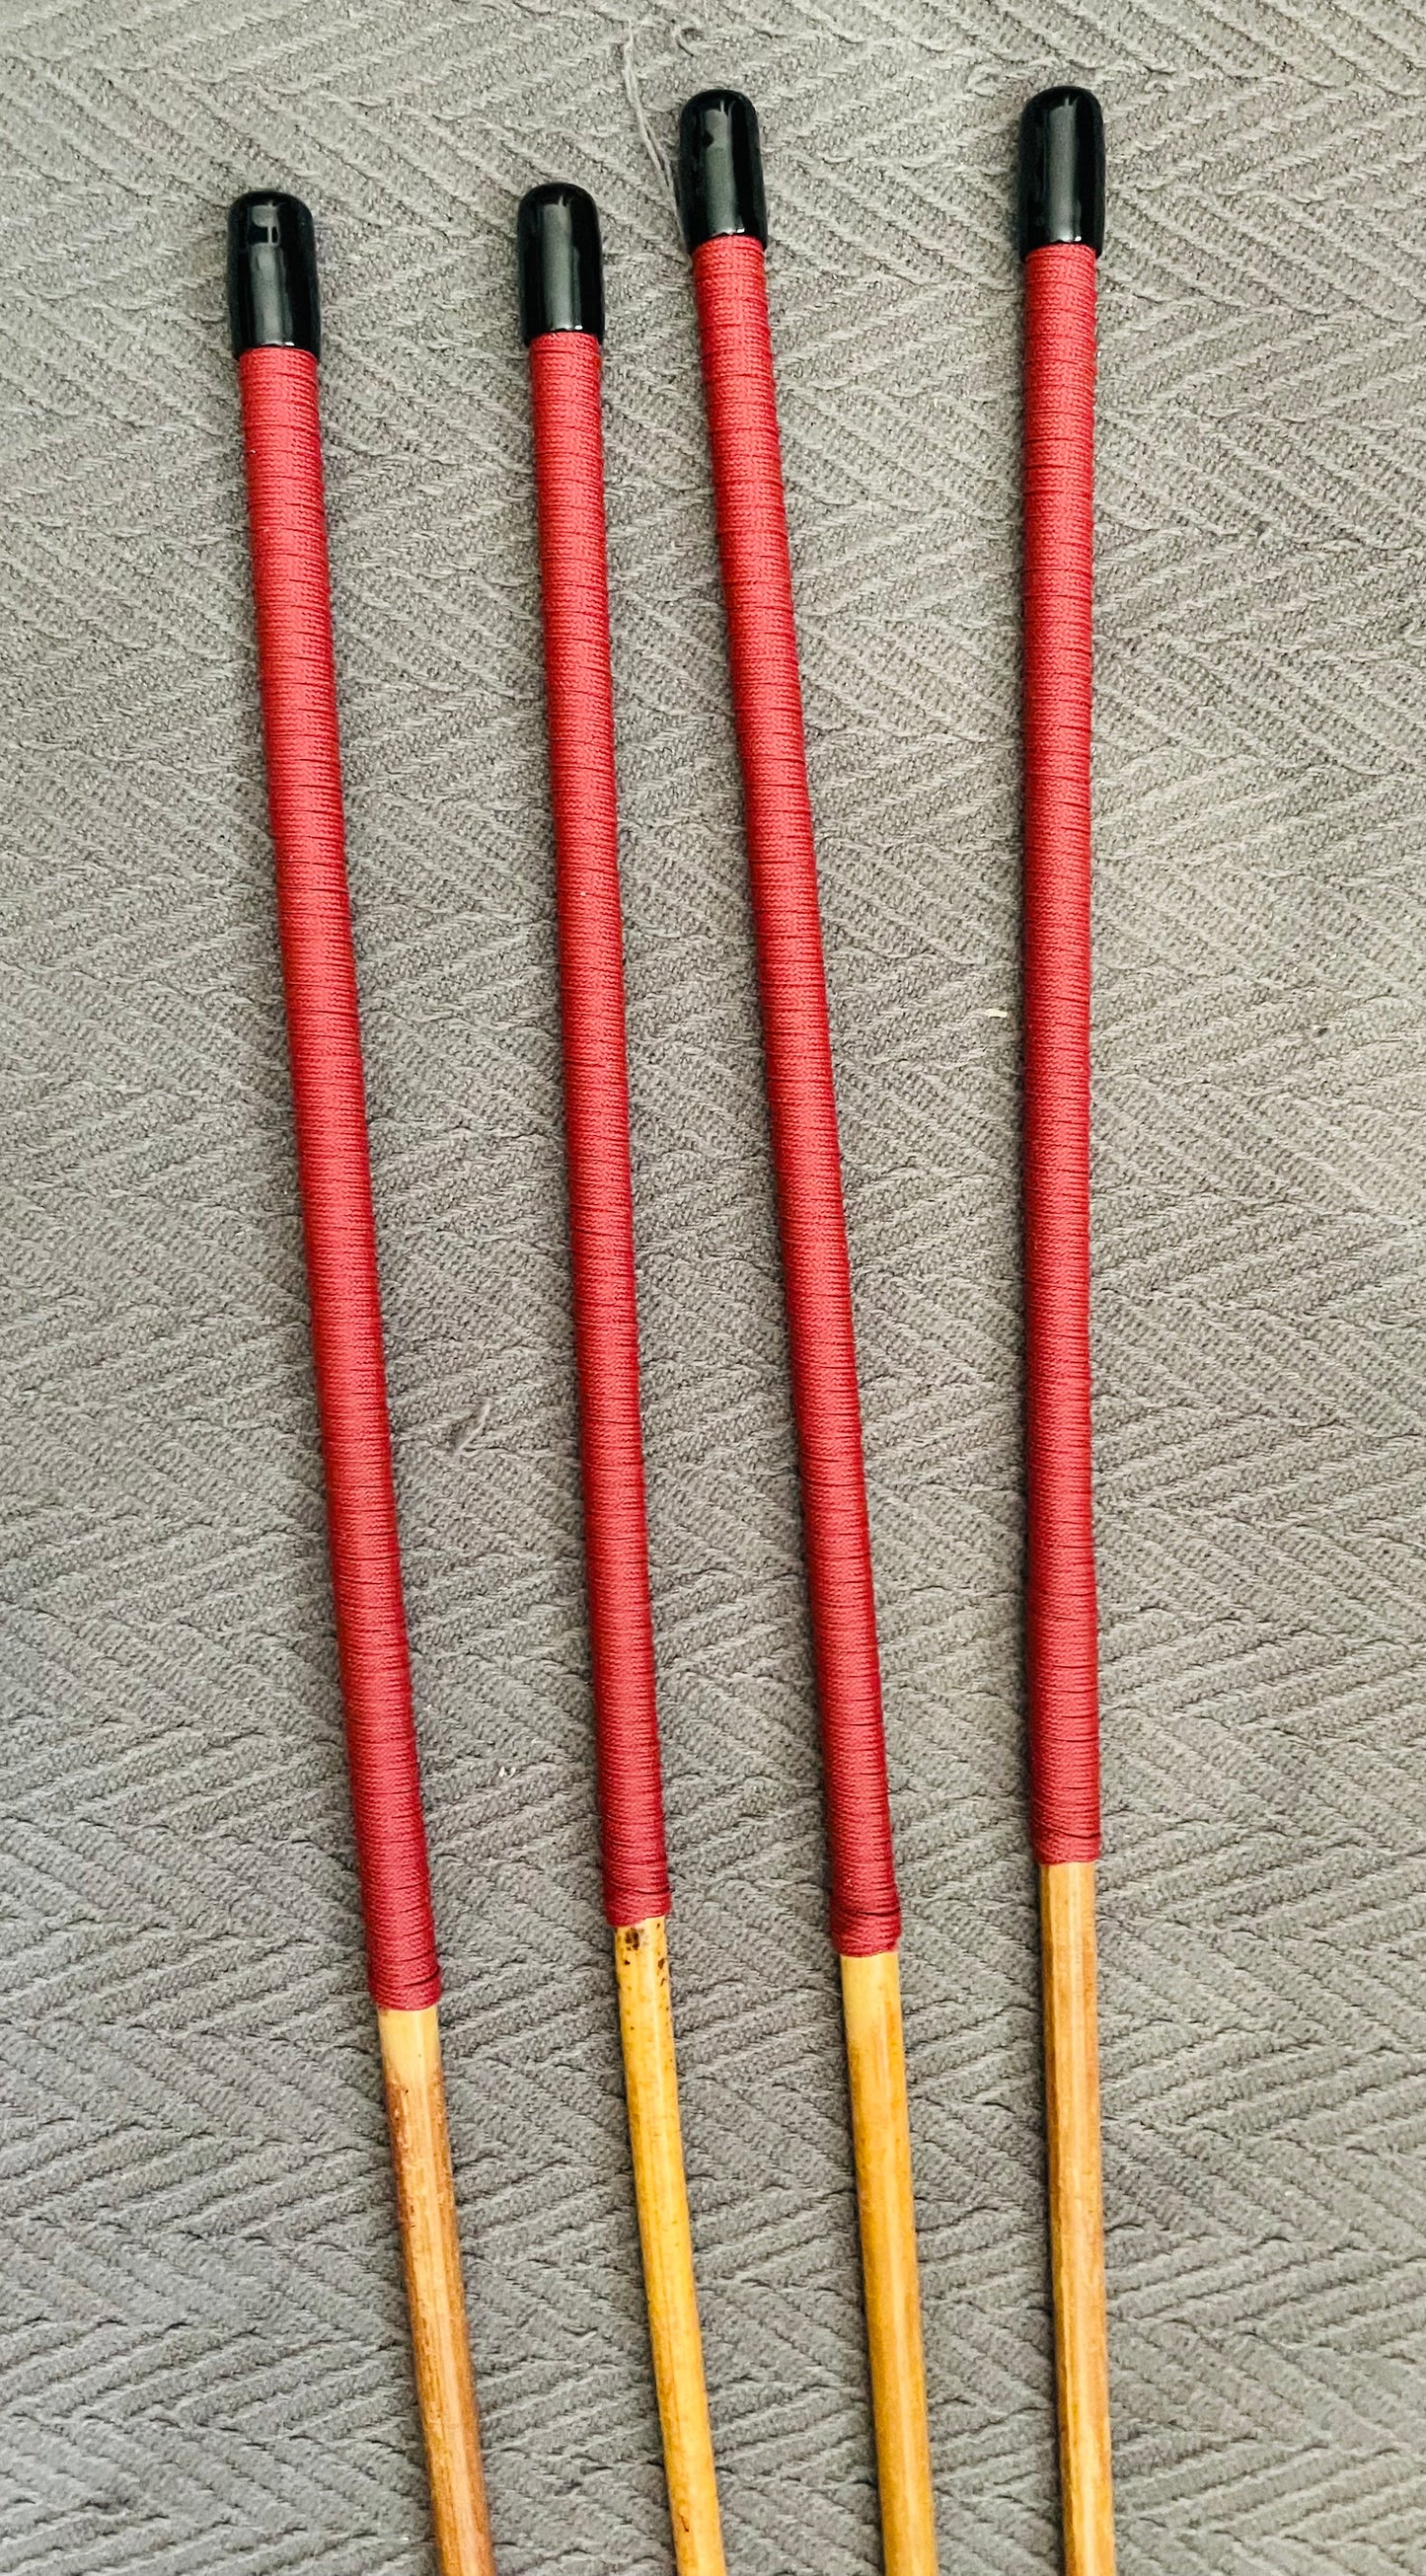 Knotless Golden / Honey Smoked Dragon Canes / Ultimate Dragon Canes Set of 4 Canes - 90 - 92 cms - Brick Red Paracord Handles - Englishvice Canes